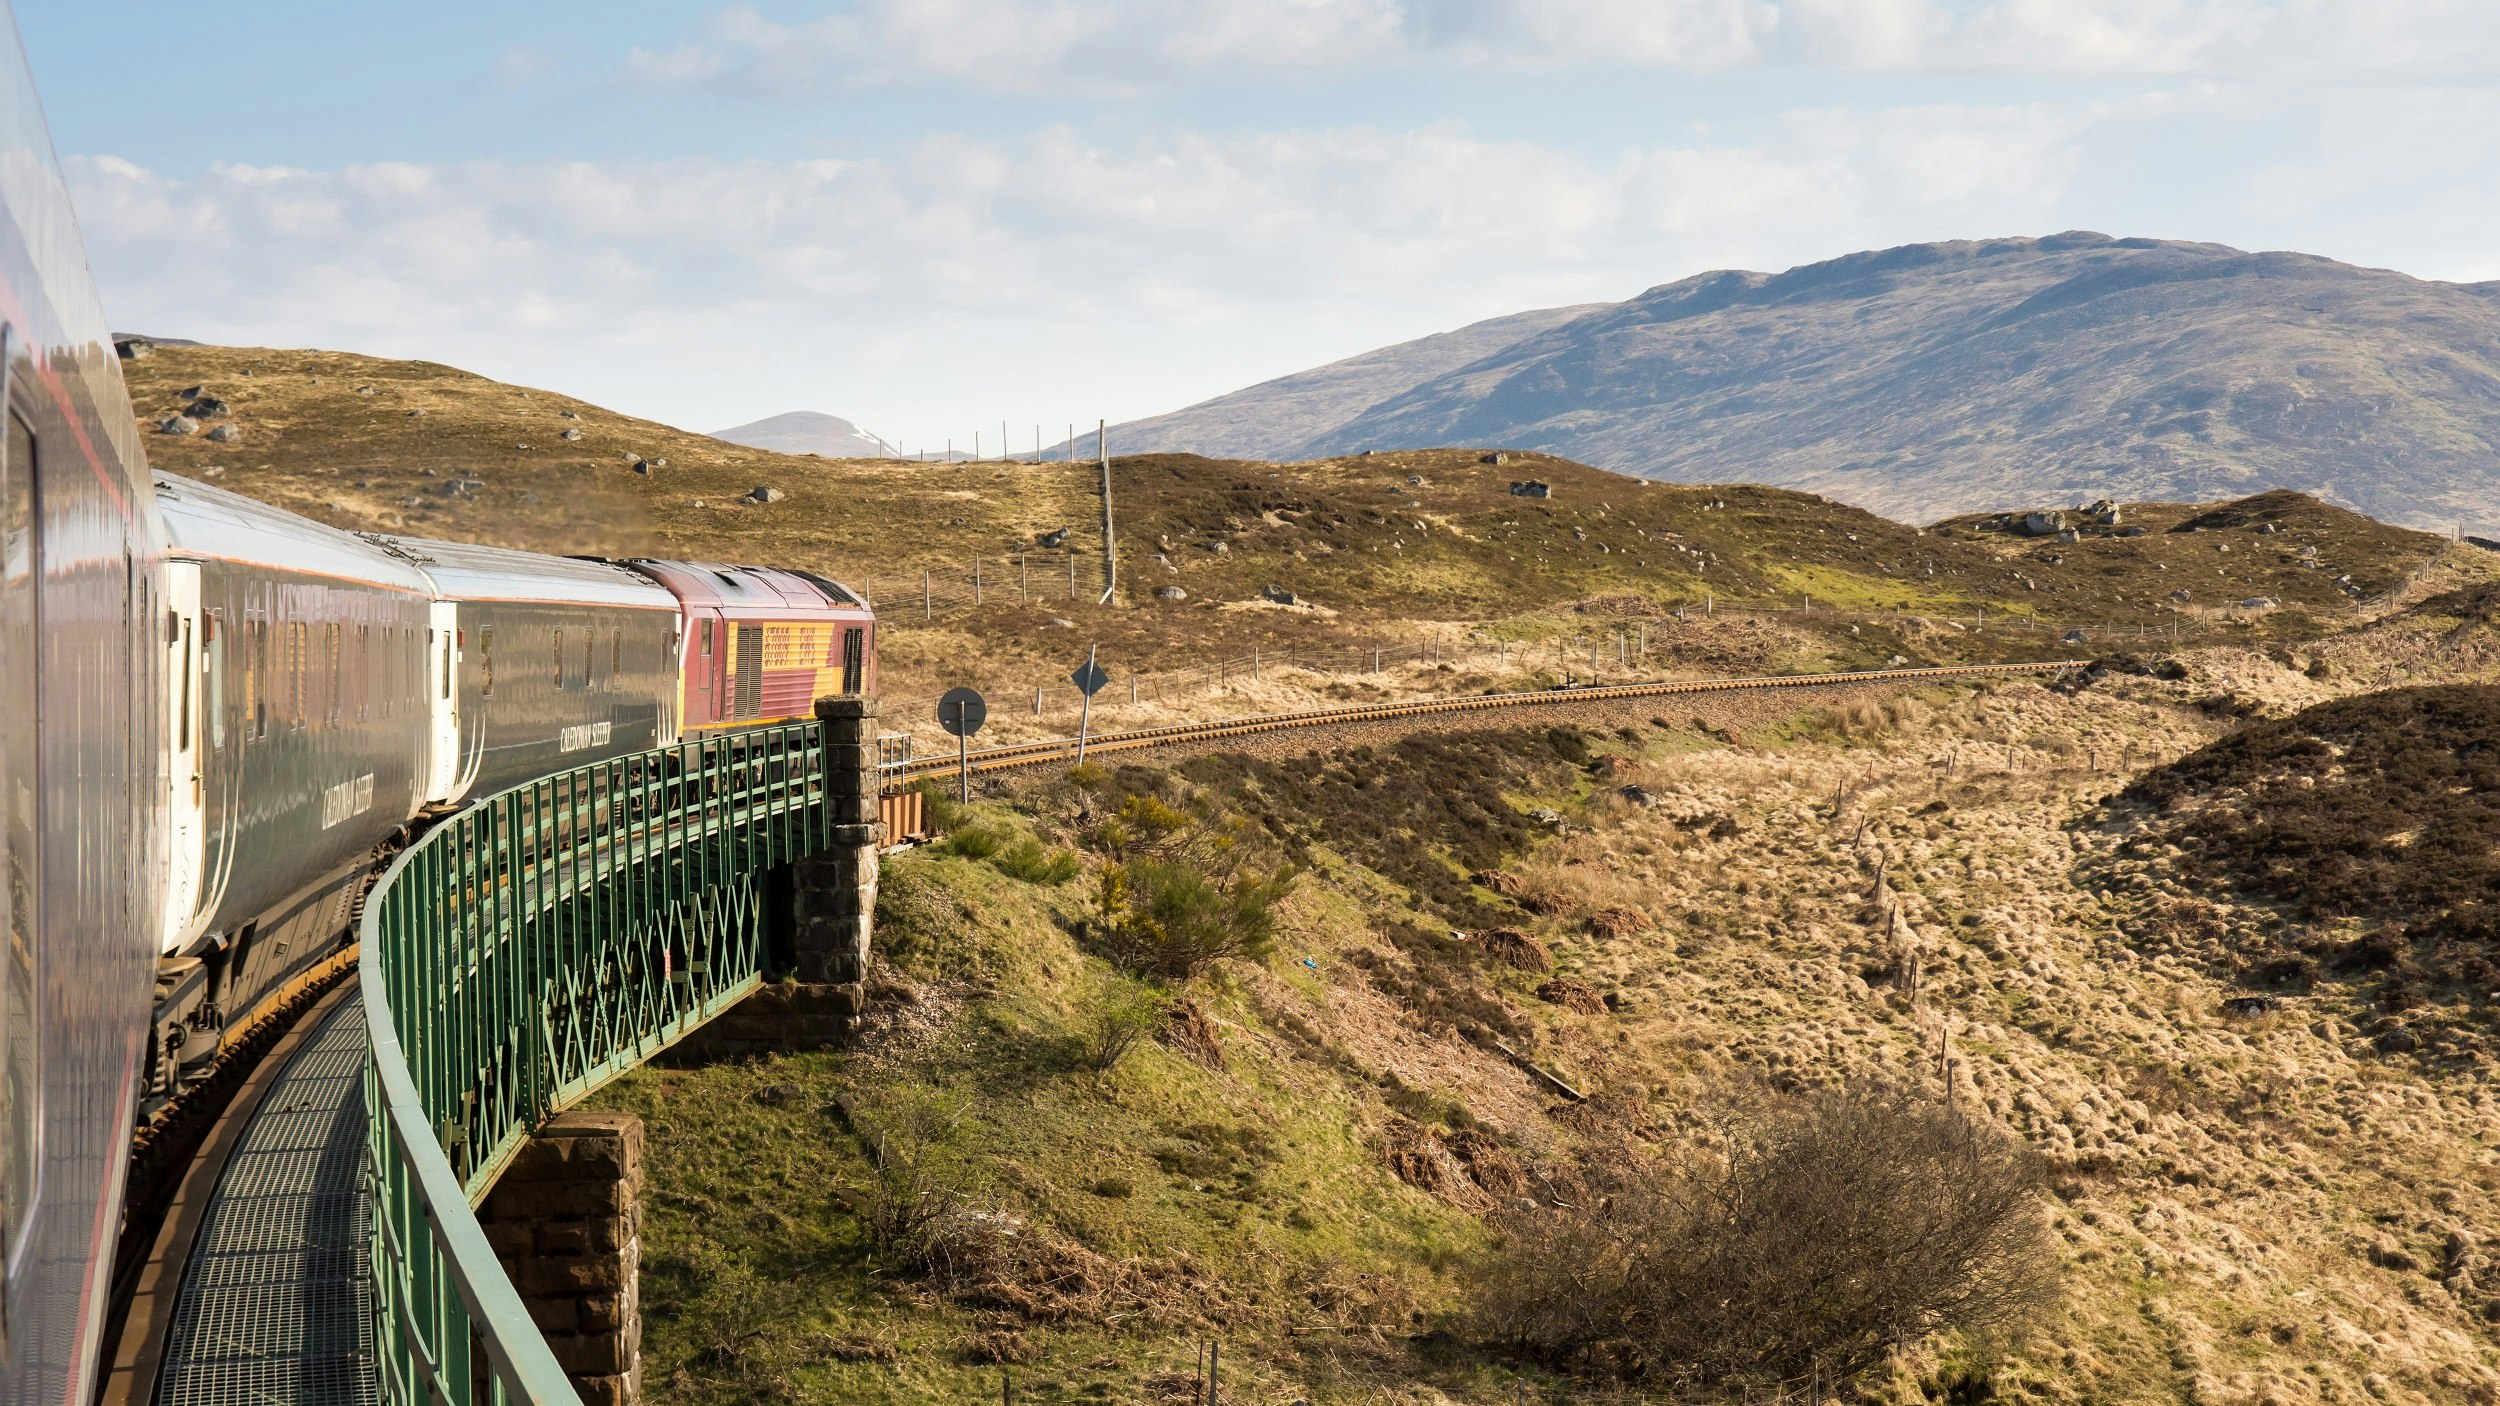 The Caledonian Sleeper train crosses Rannoch Viaduct on the scenic West Highland Line railway in the Scottish Highlands; the image is taken from the train on a curve, so you see the train arching ahead through a barren looking section of rolling hills..